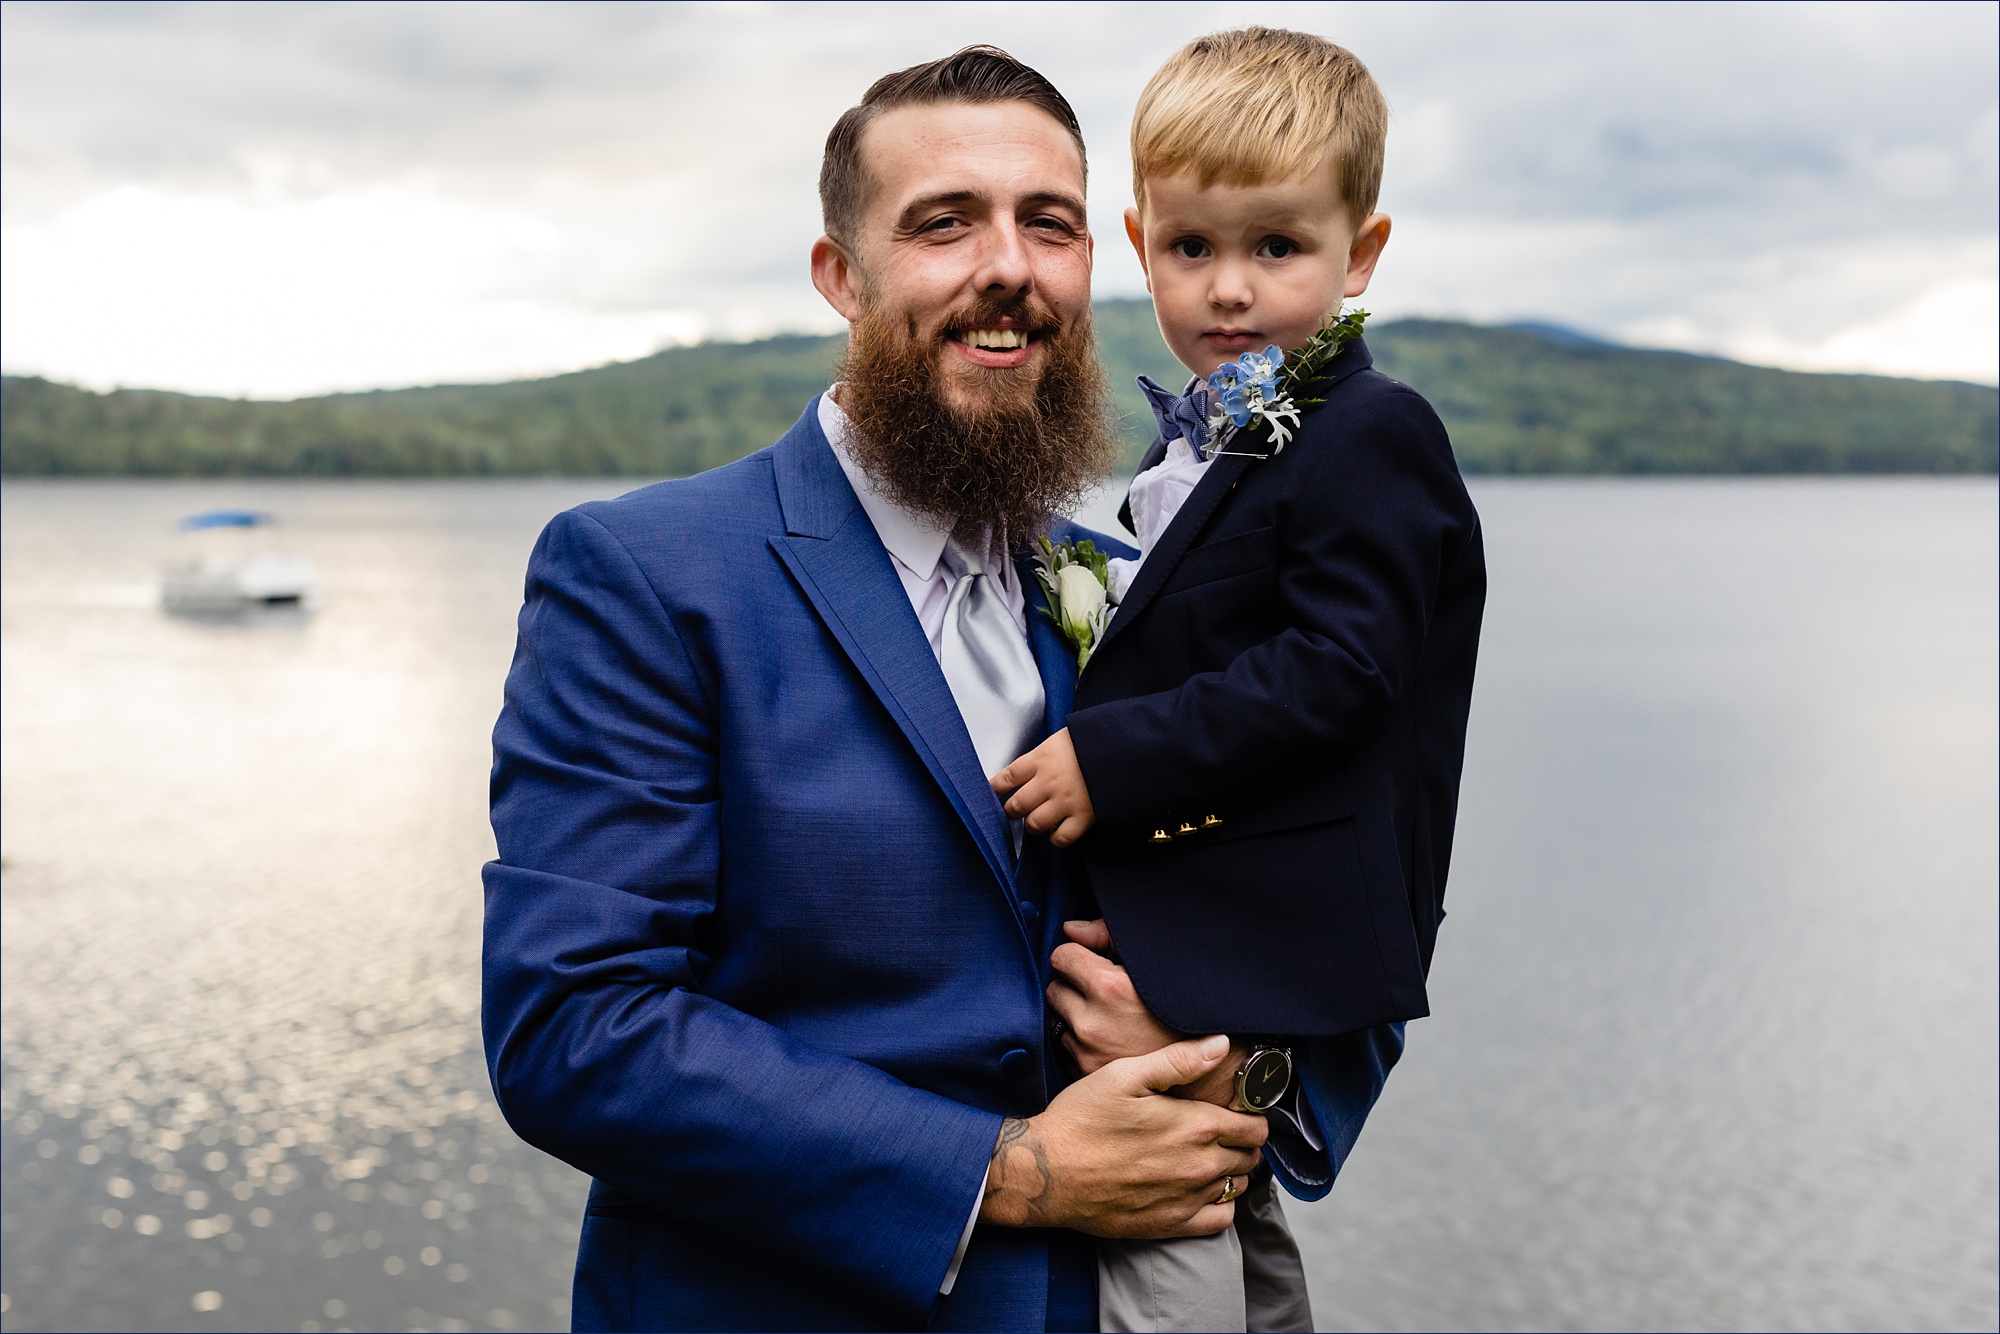 The groom and his son stand before the Maine lake and mountains